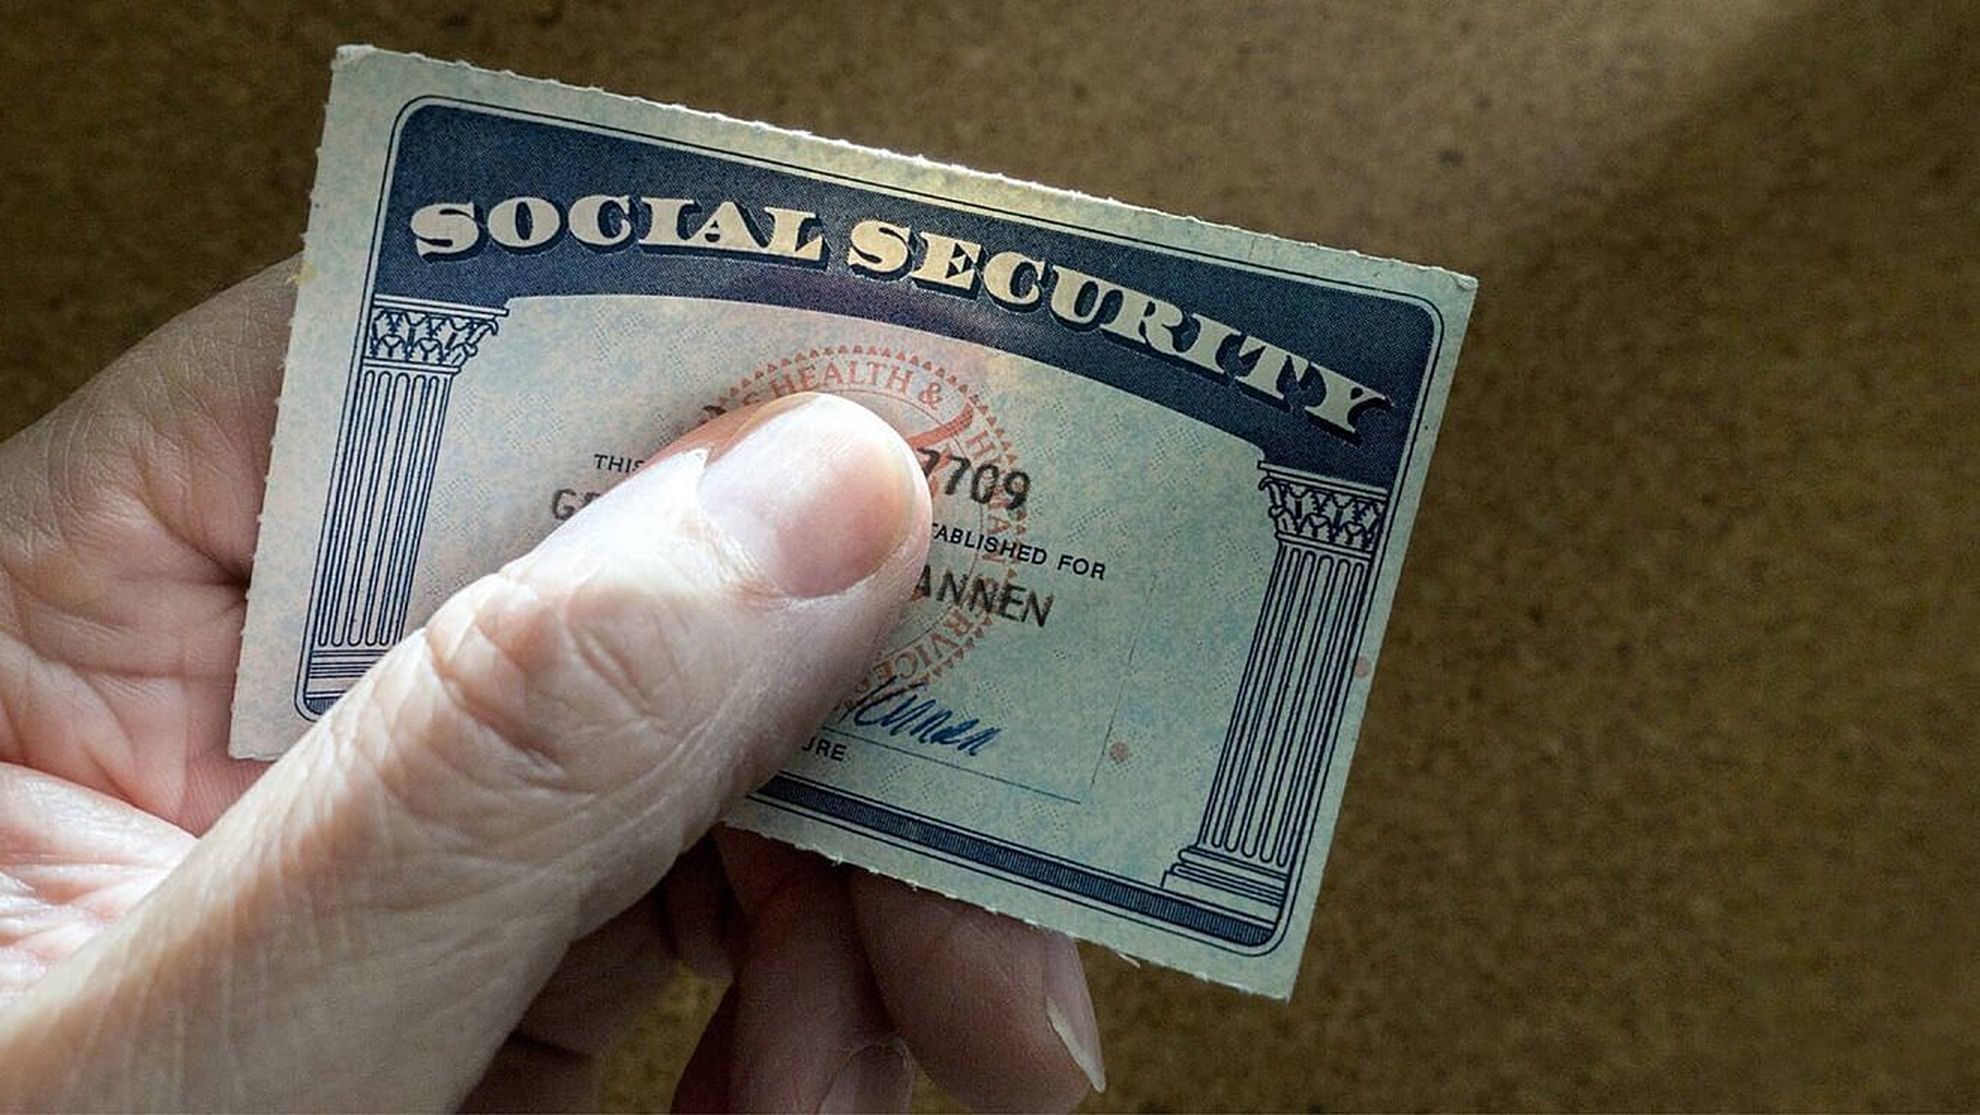 SSI Payments August: What time does Social Security direct deposit?